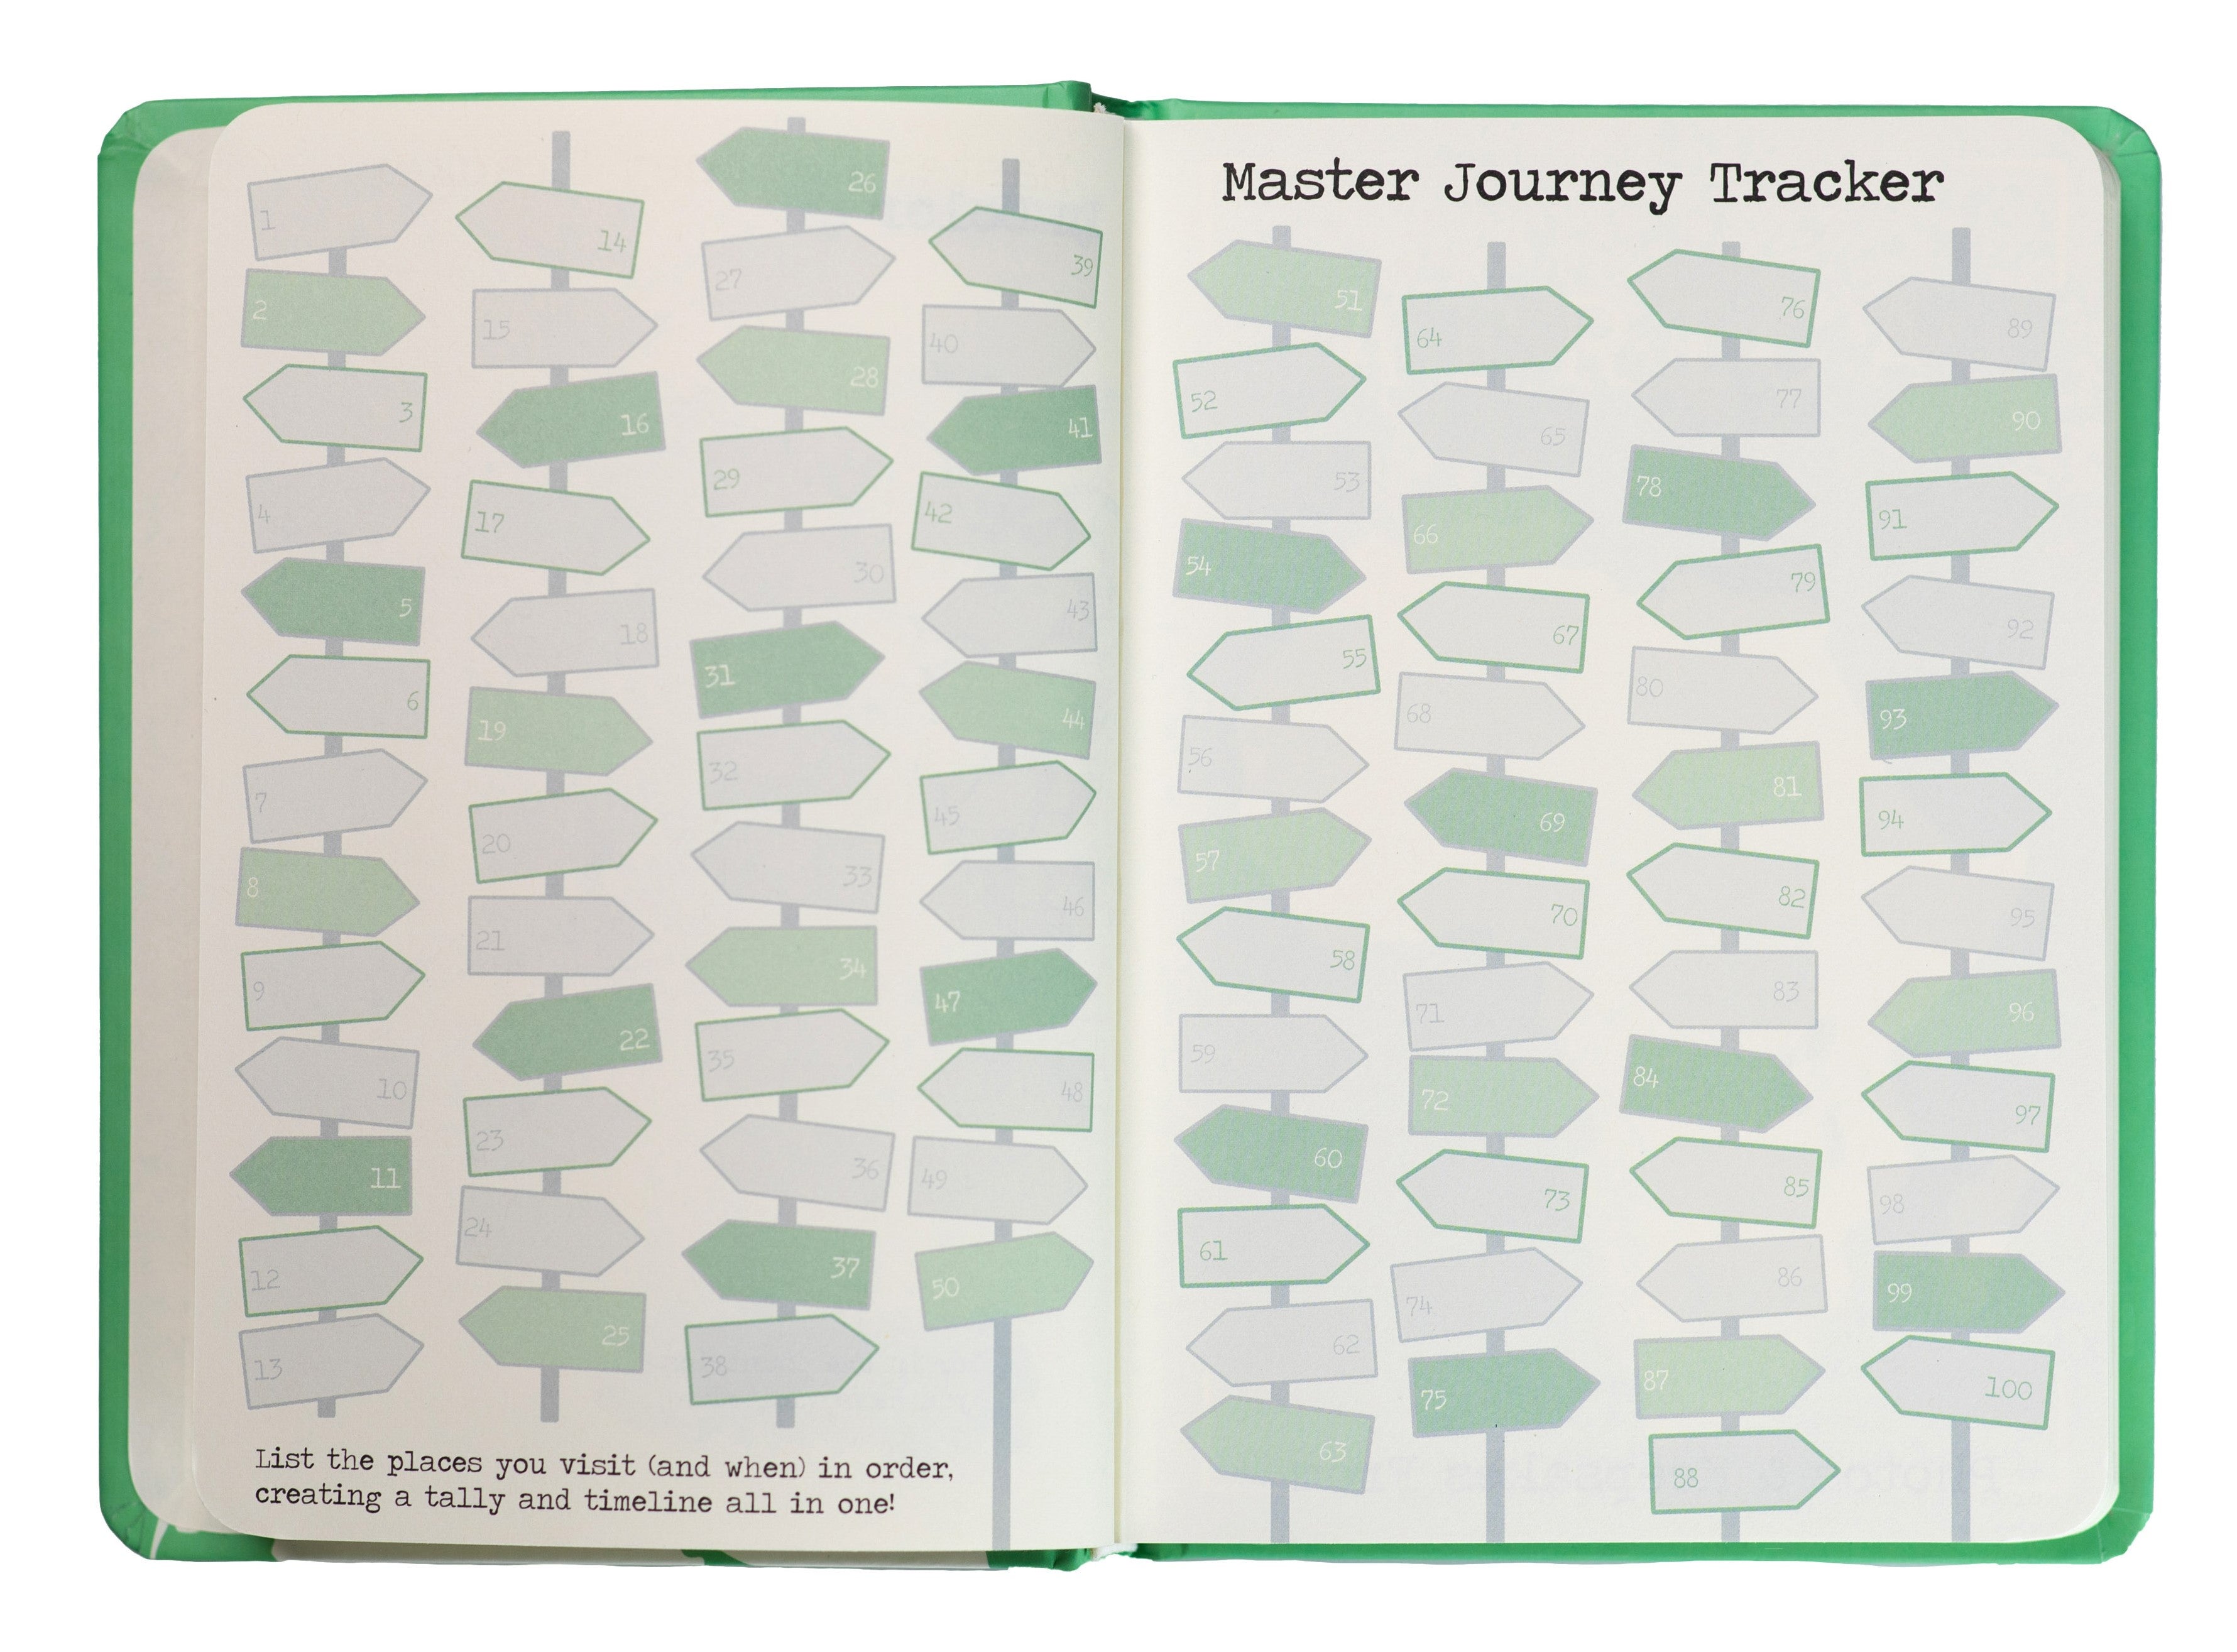 The Traveler's Playbook - world travel journal, Master Journey Tracker Page